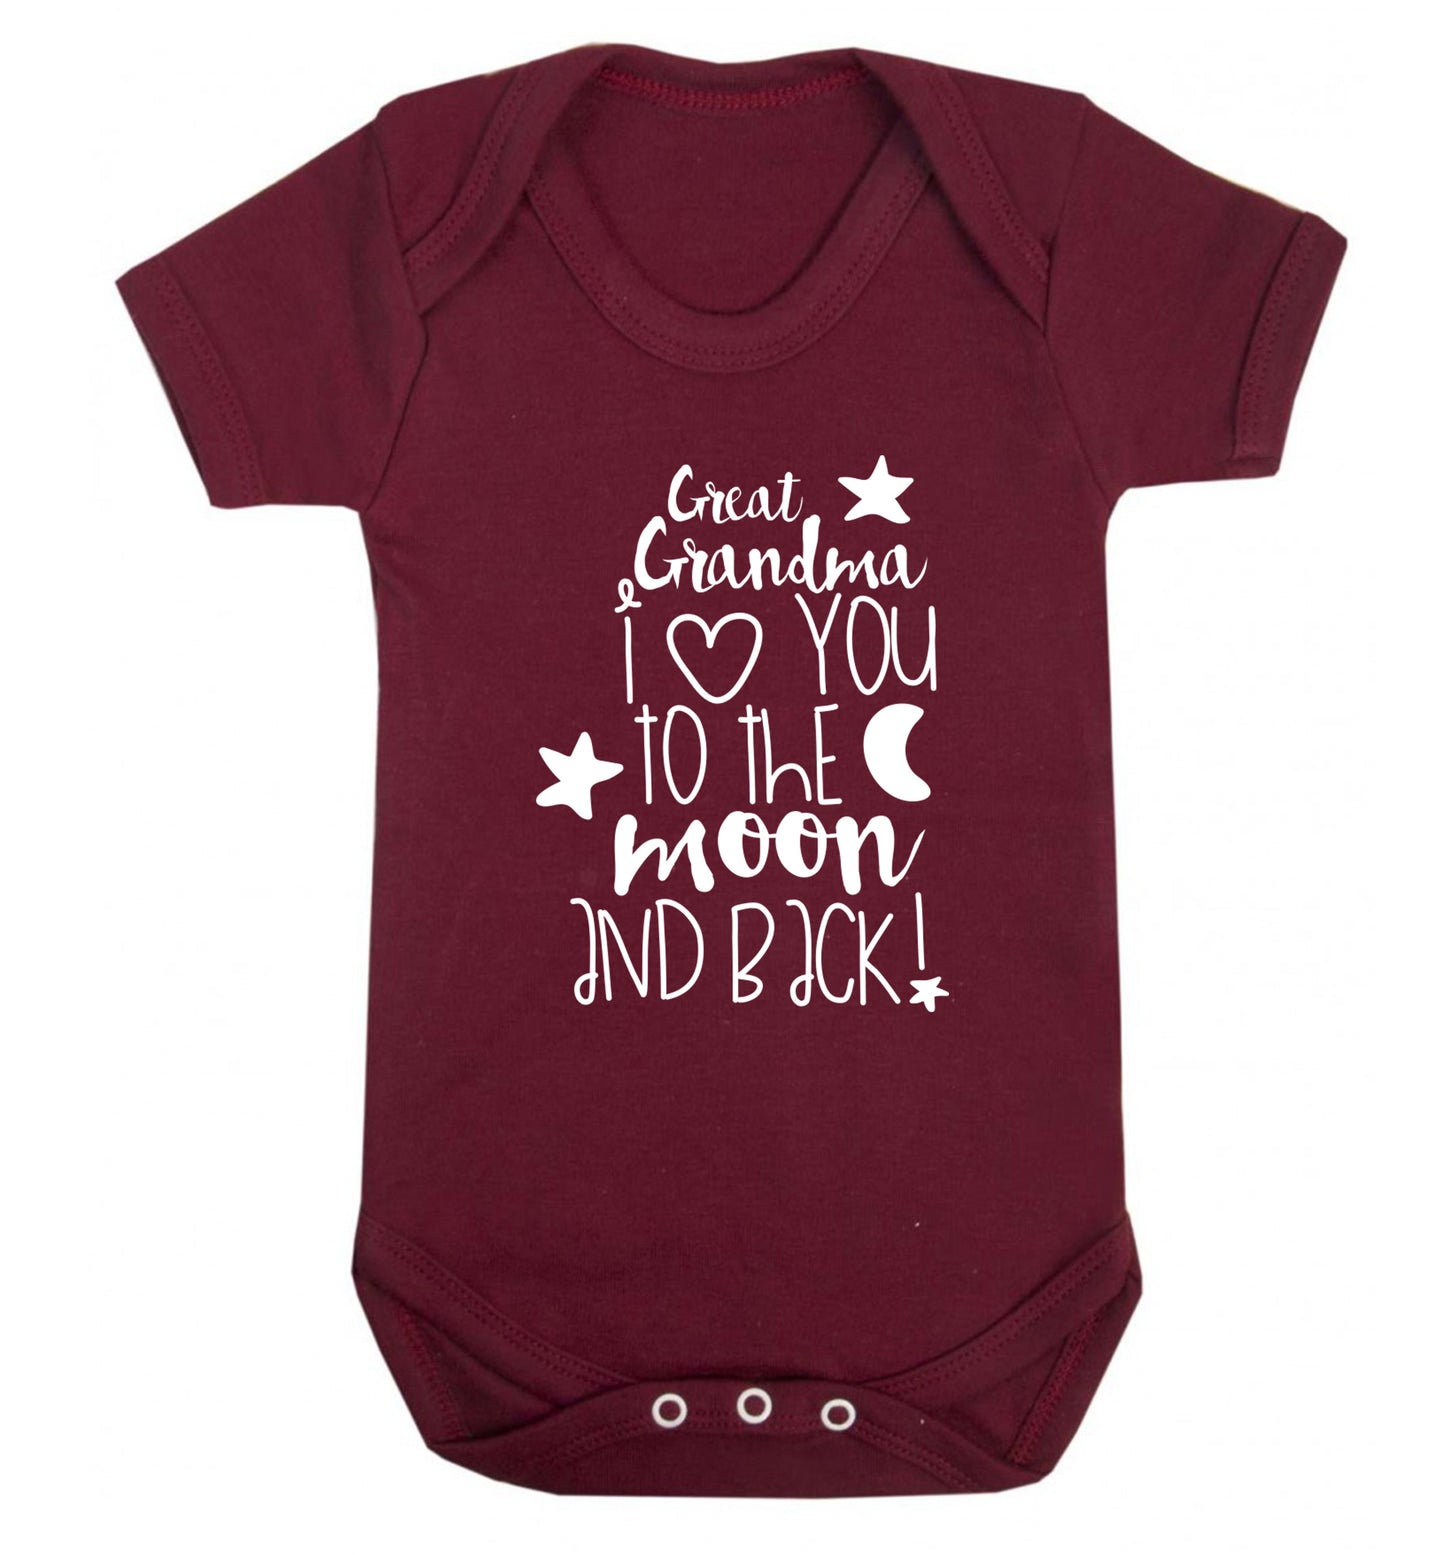 Great Grandma I love you to the moon and back Baby Vest maroon 18-24 months